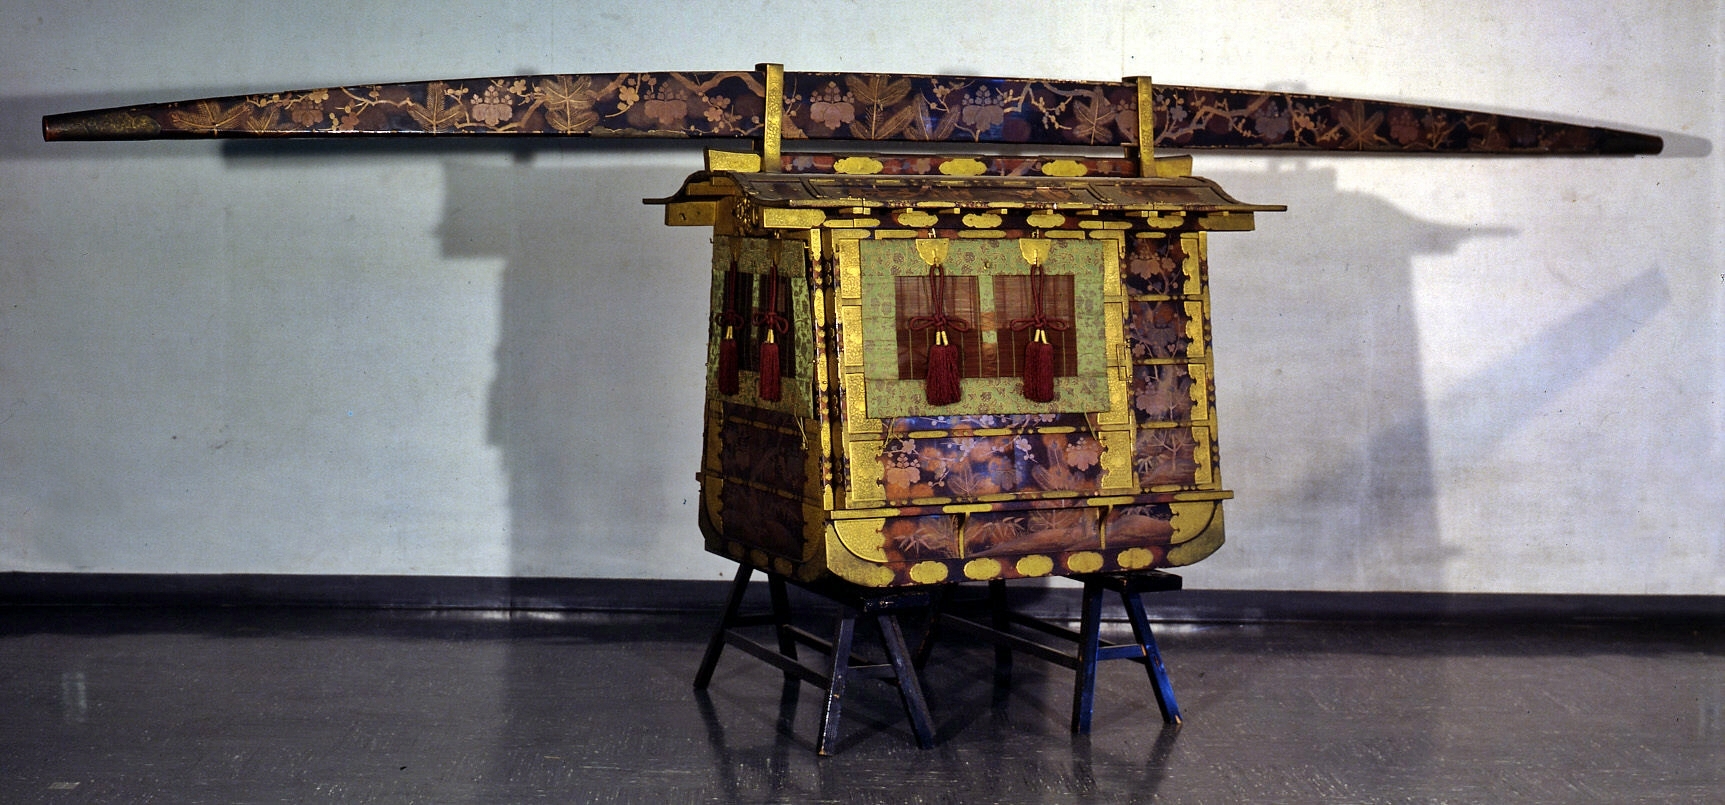 This is said to be a vehicle that the wife of the castle lord had ridden. It has pine, bamboo, and plum drawn on it, which is thought to be  auspicious in Japan.